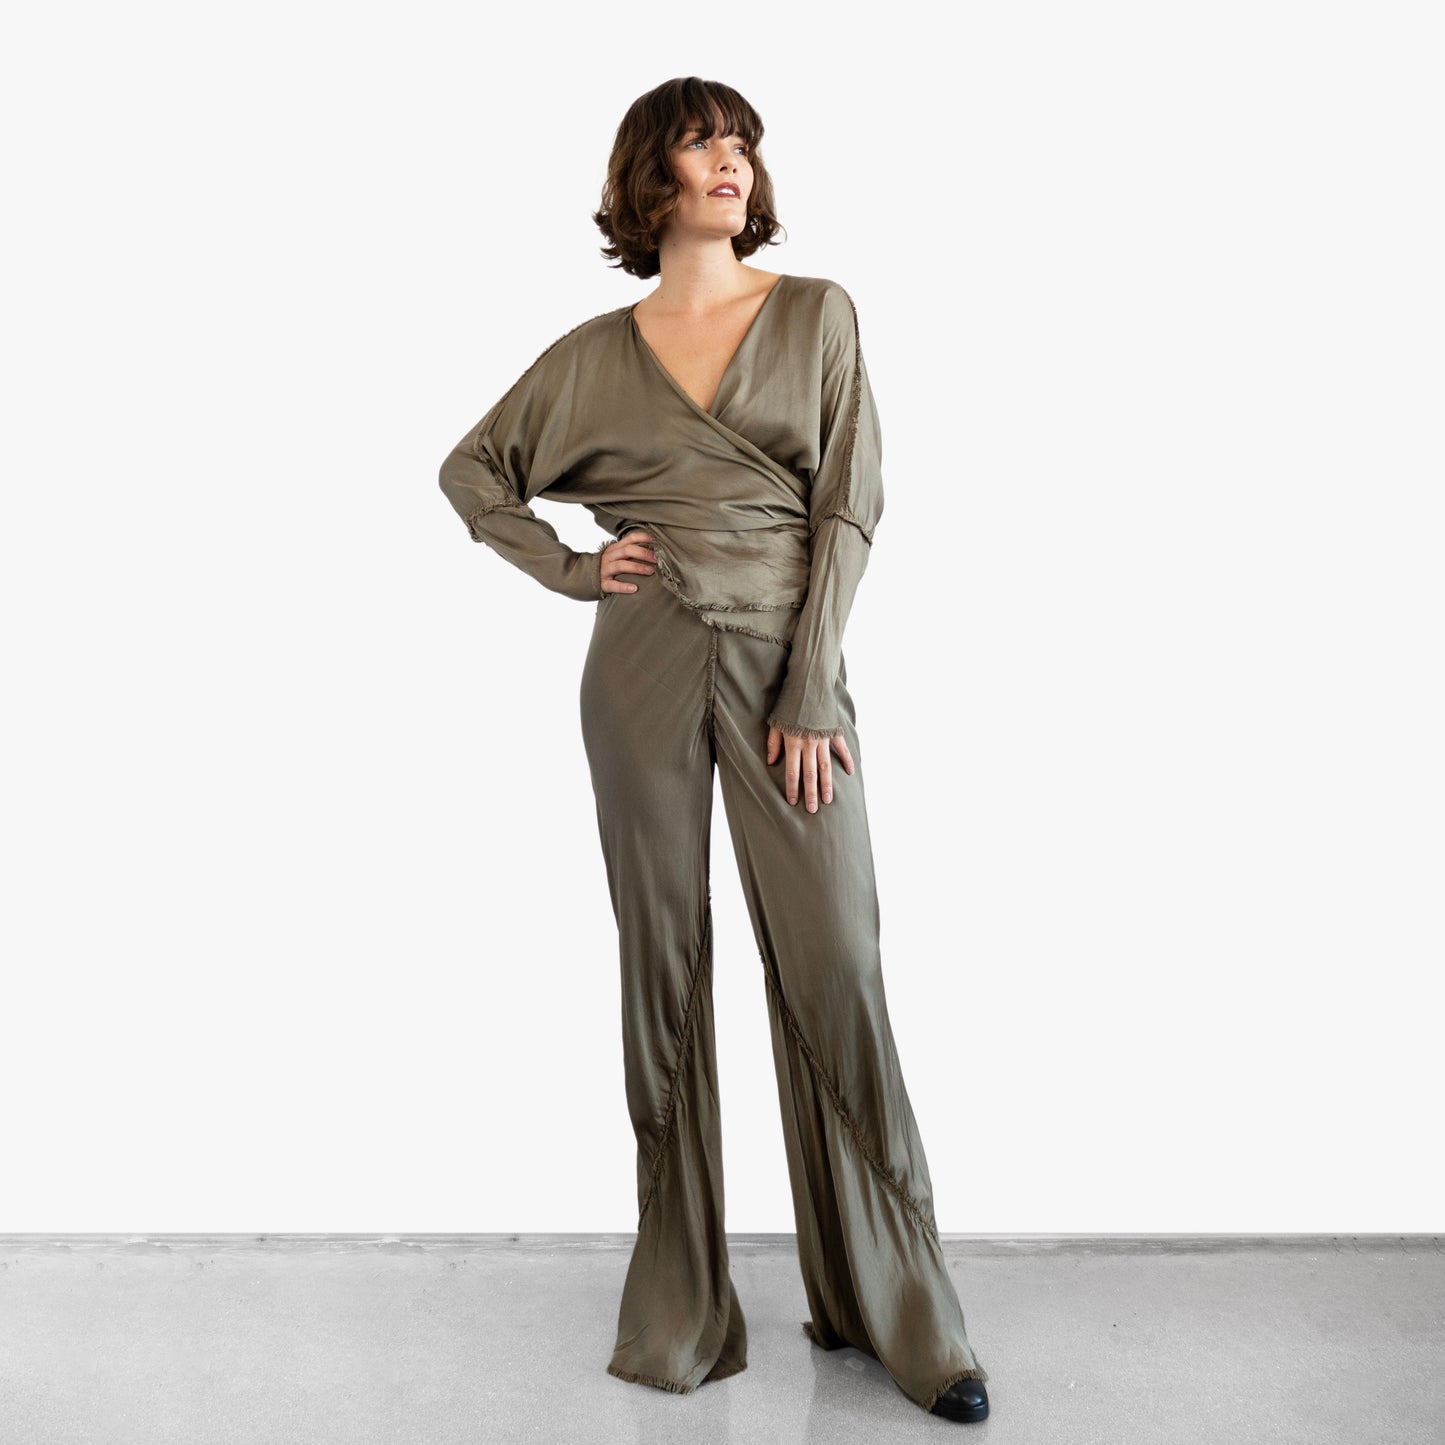 Model wearing a green silk wrap top and pants